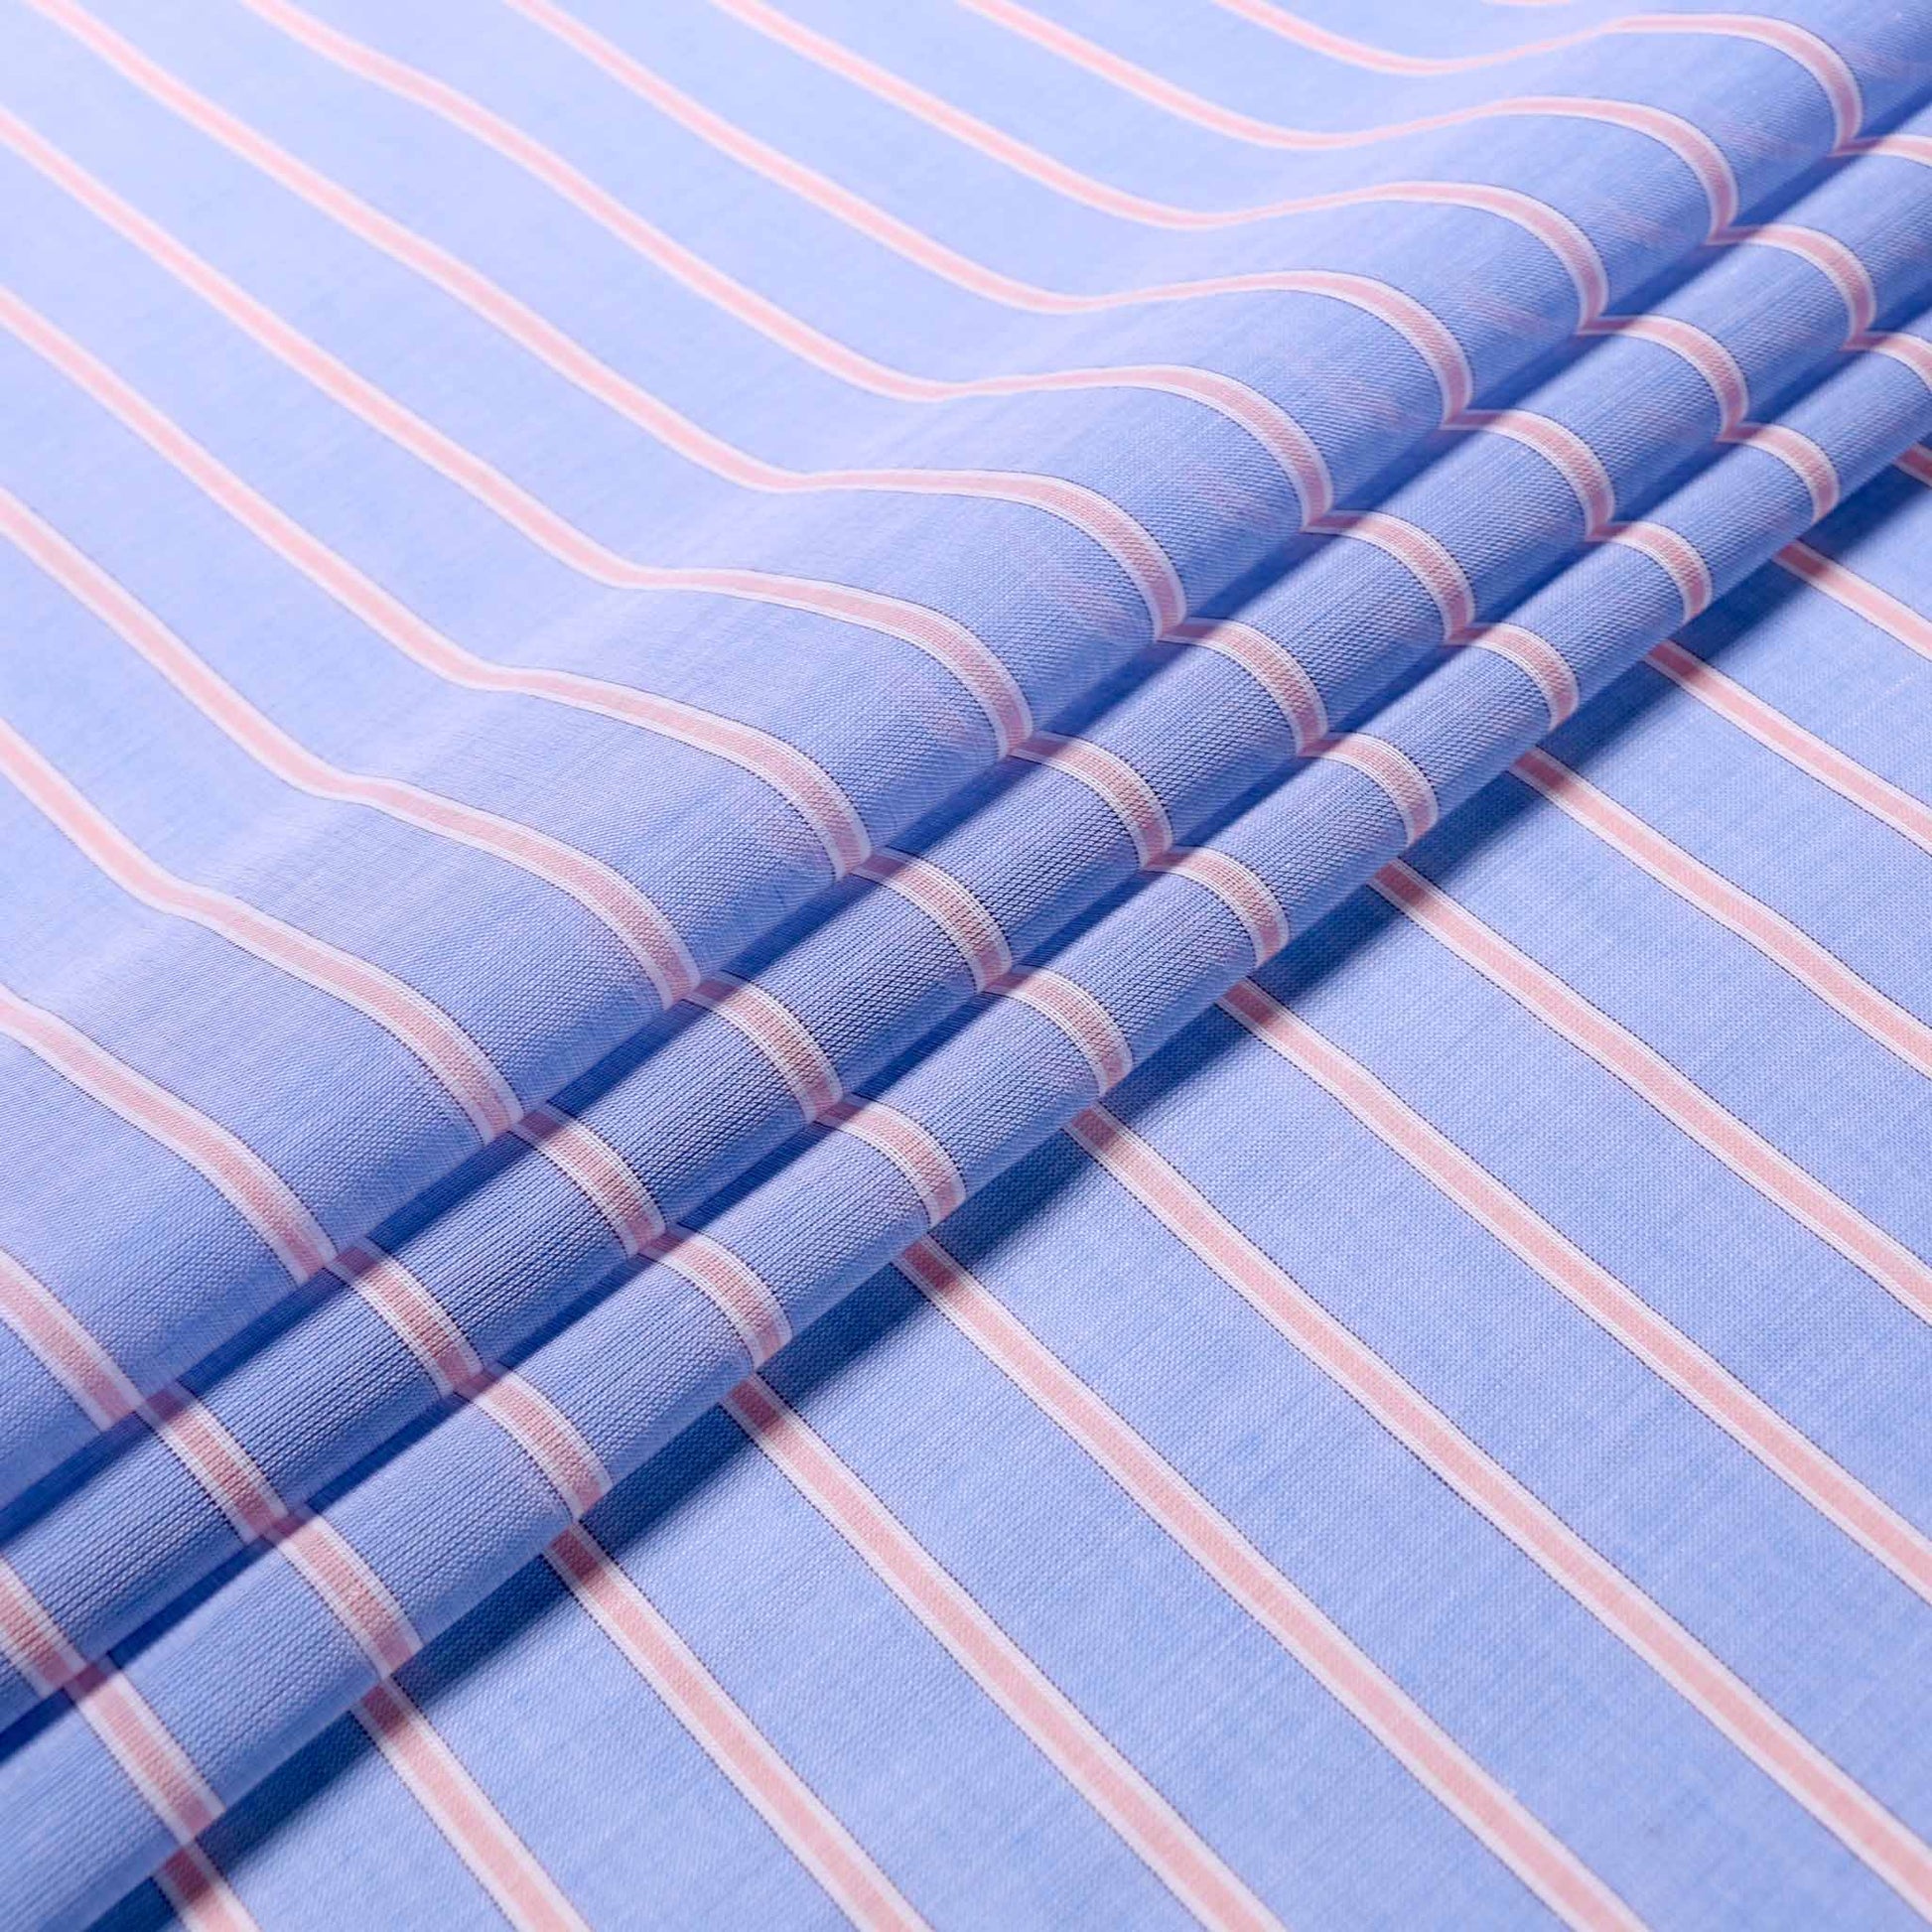 folded cotton voile dressmaking fabric in blue with pink stripes